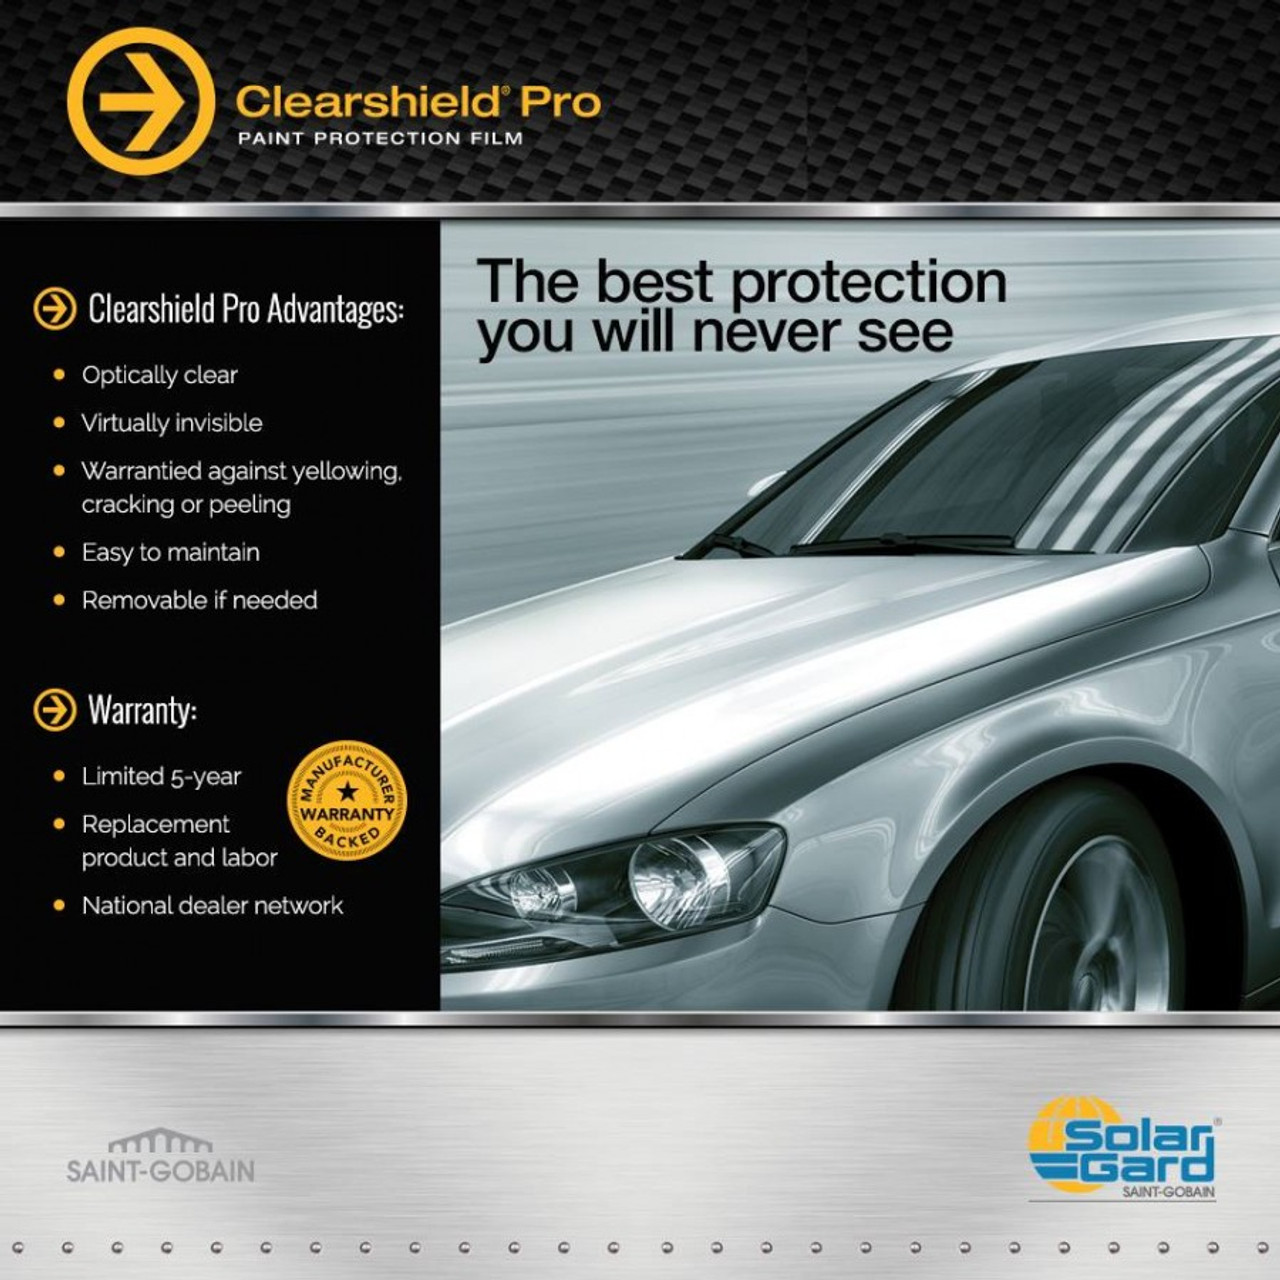 What Is Clear Bra? An Explanation From Mesa's Paint Protection Experts